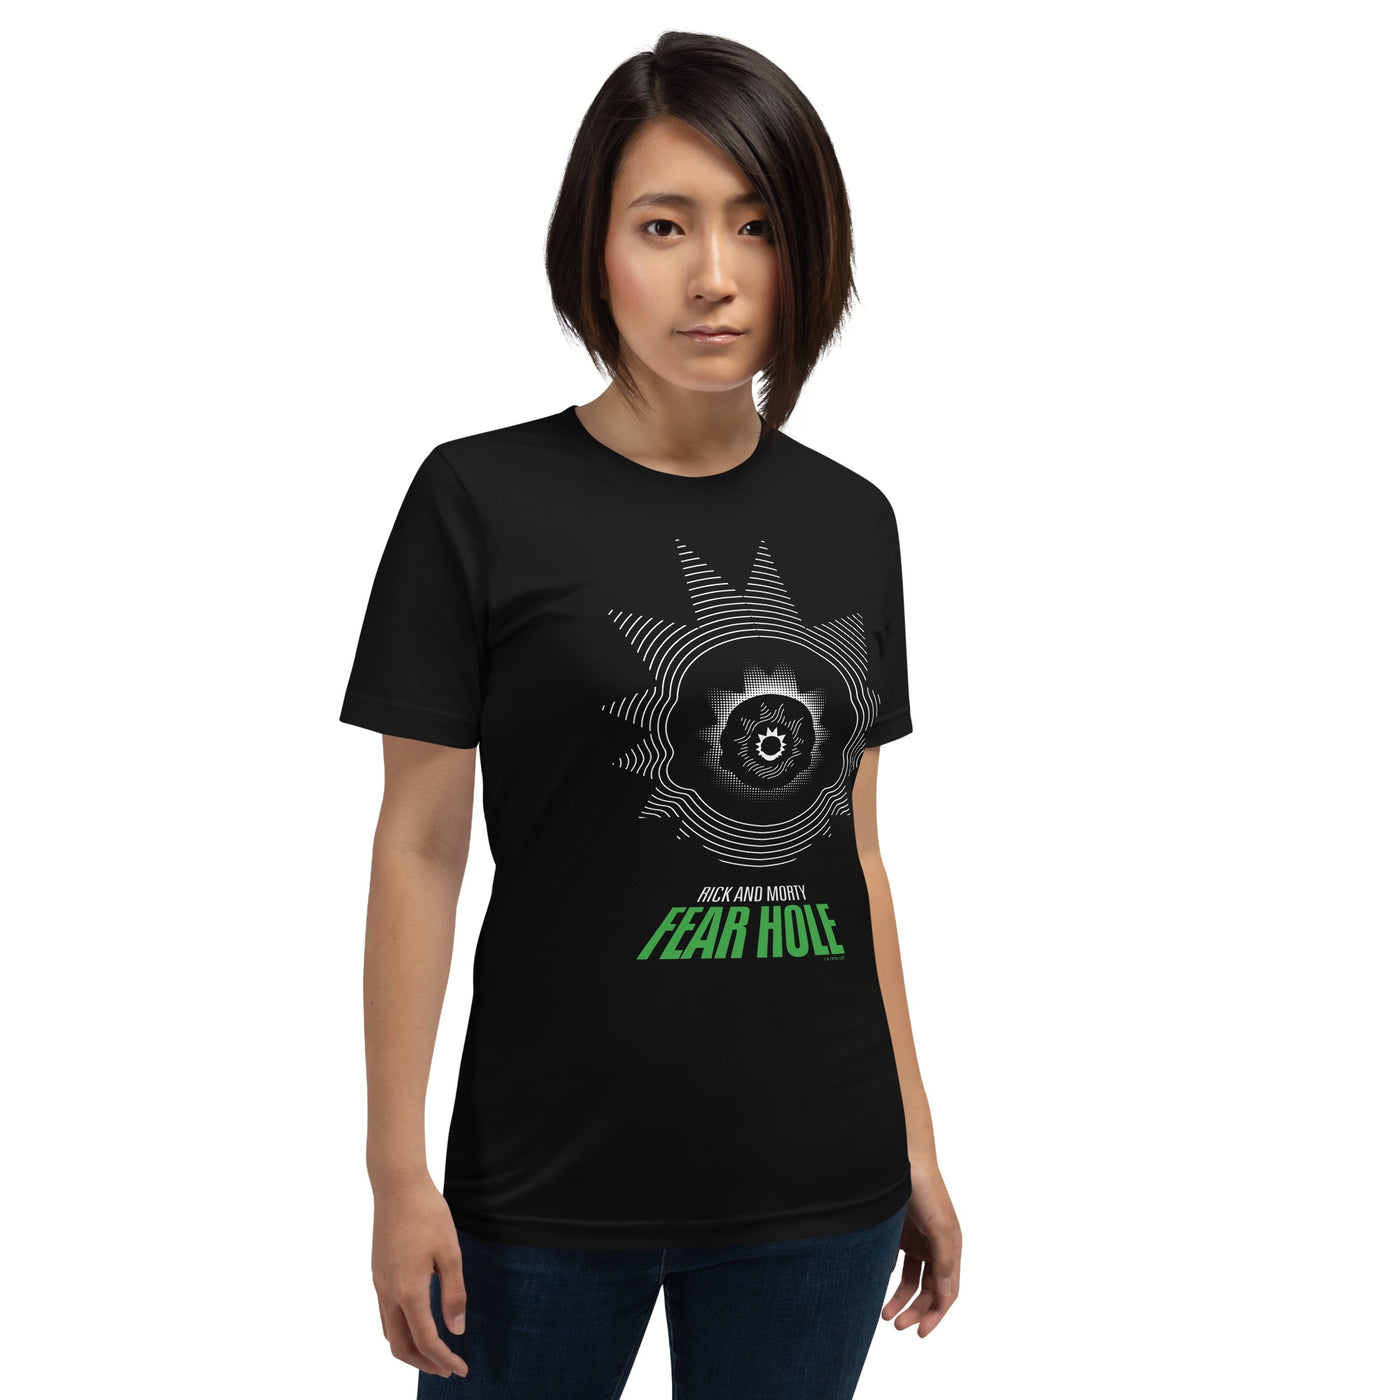 Rick and Morty Fear Hole Adult T-Shirt